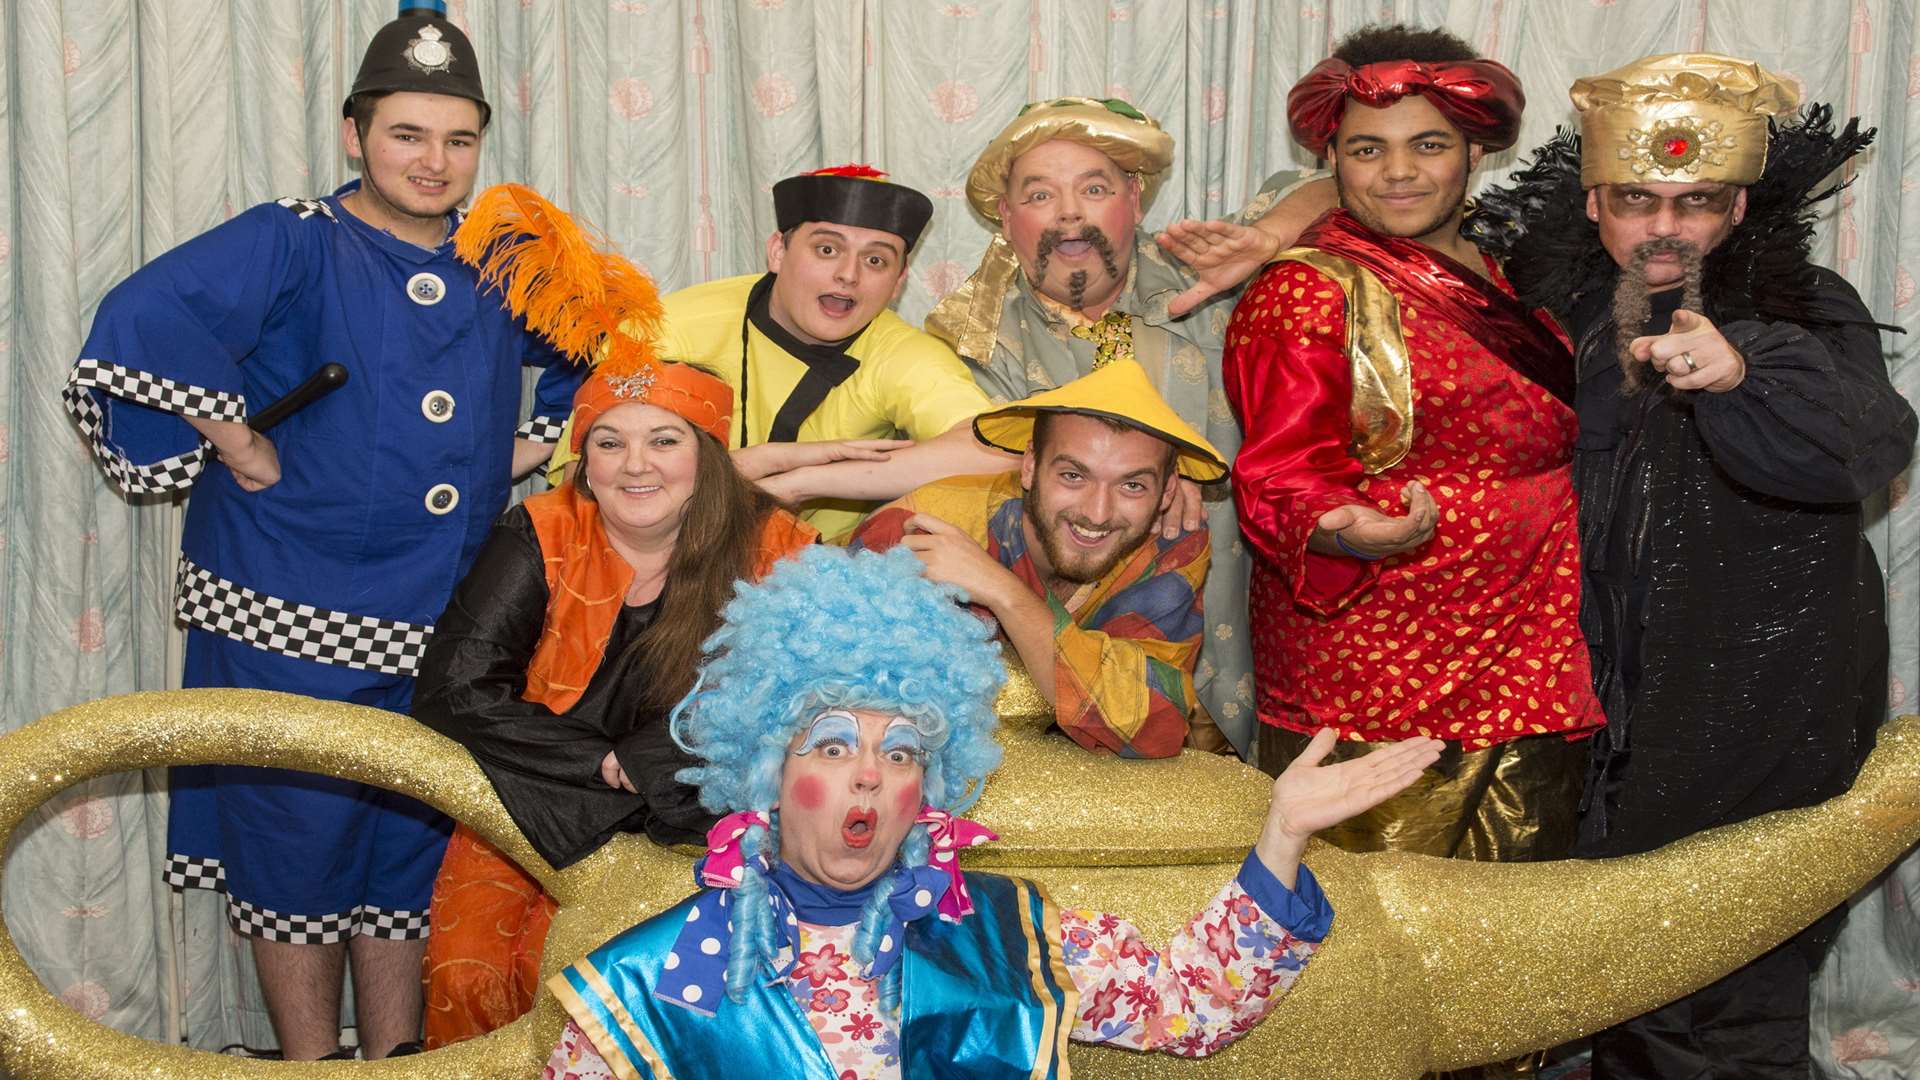 Aladdin is this year's show at Folkestone's Leas Cliff Hall